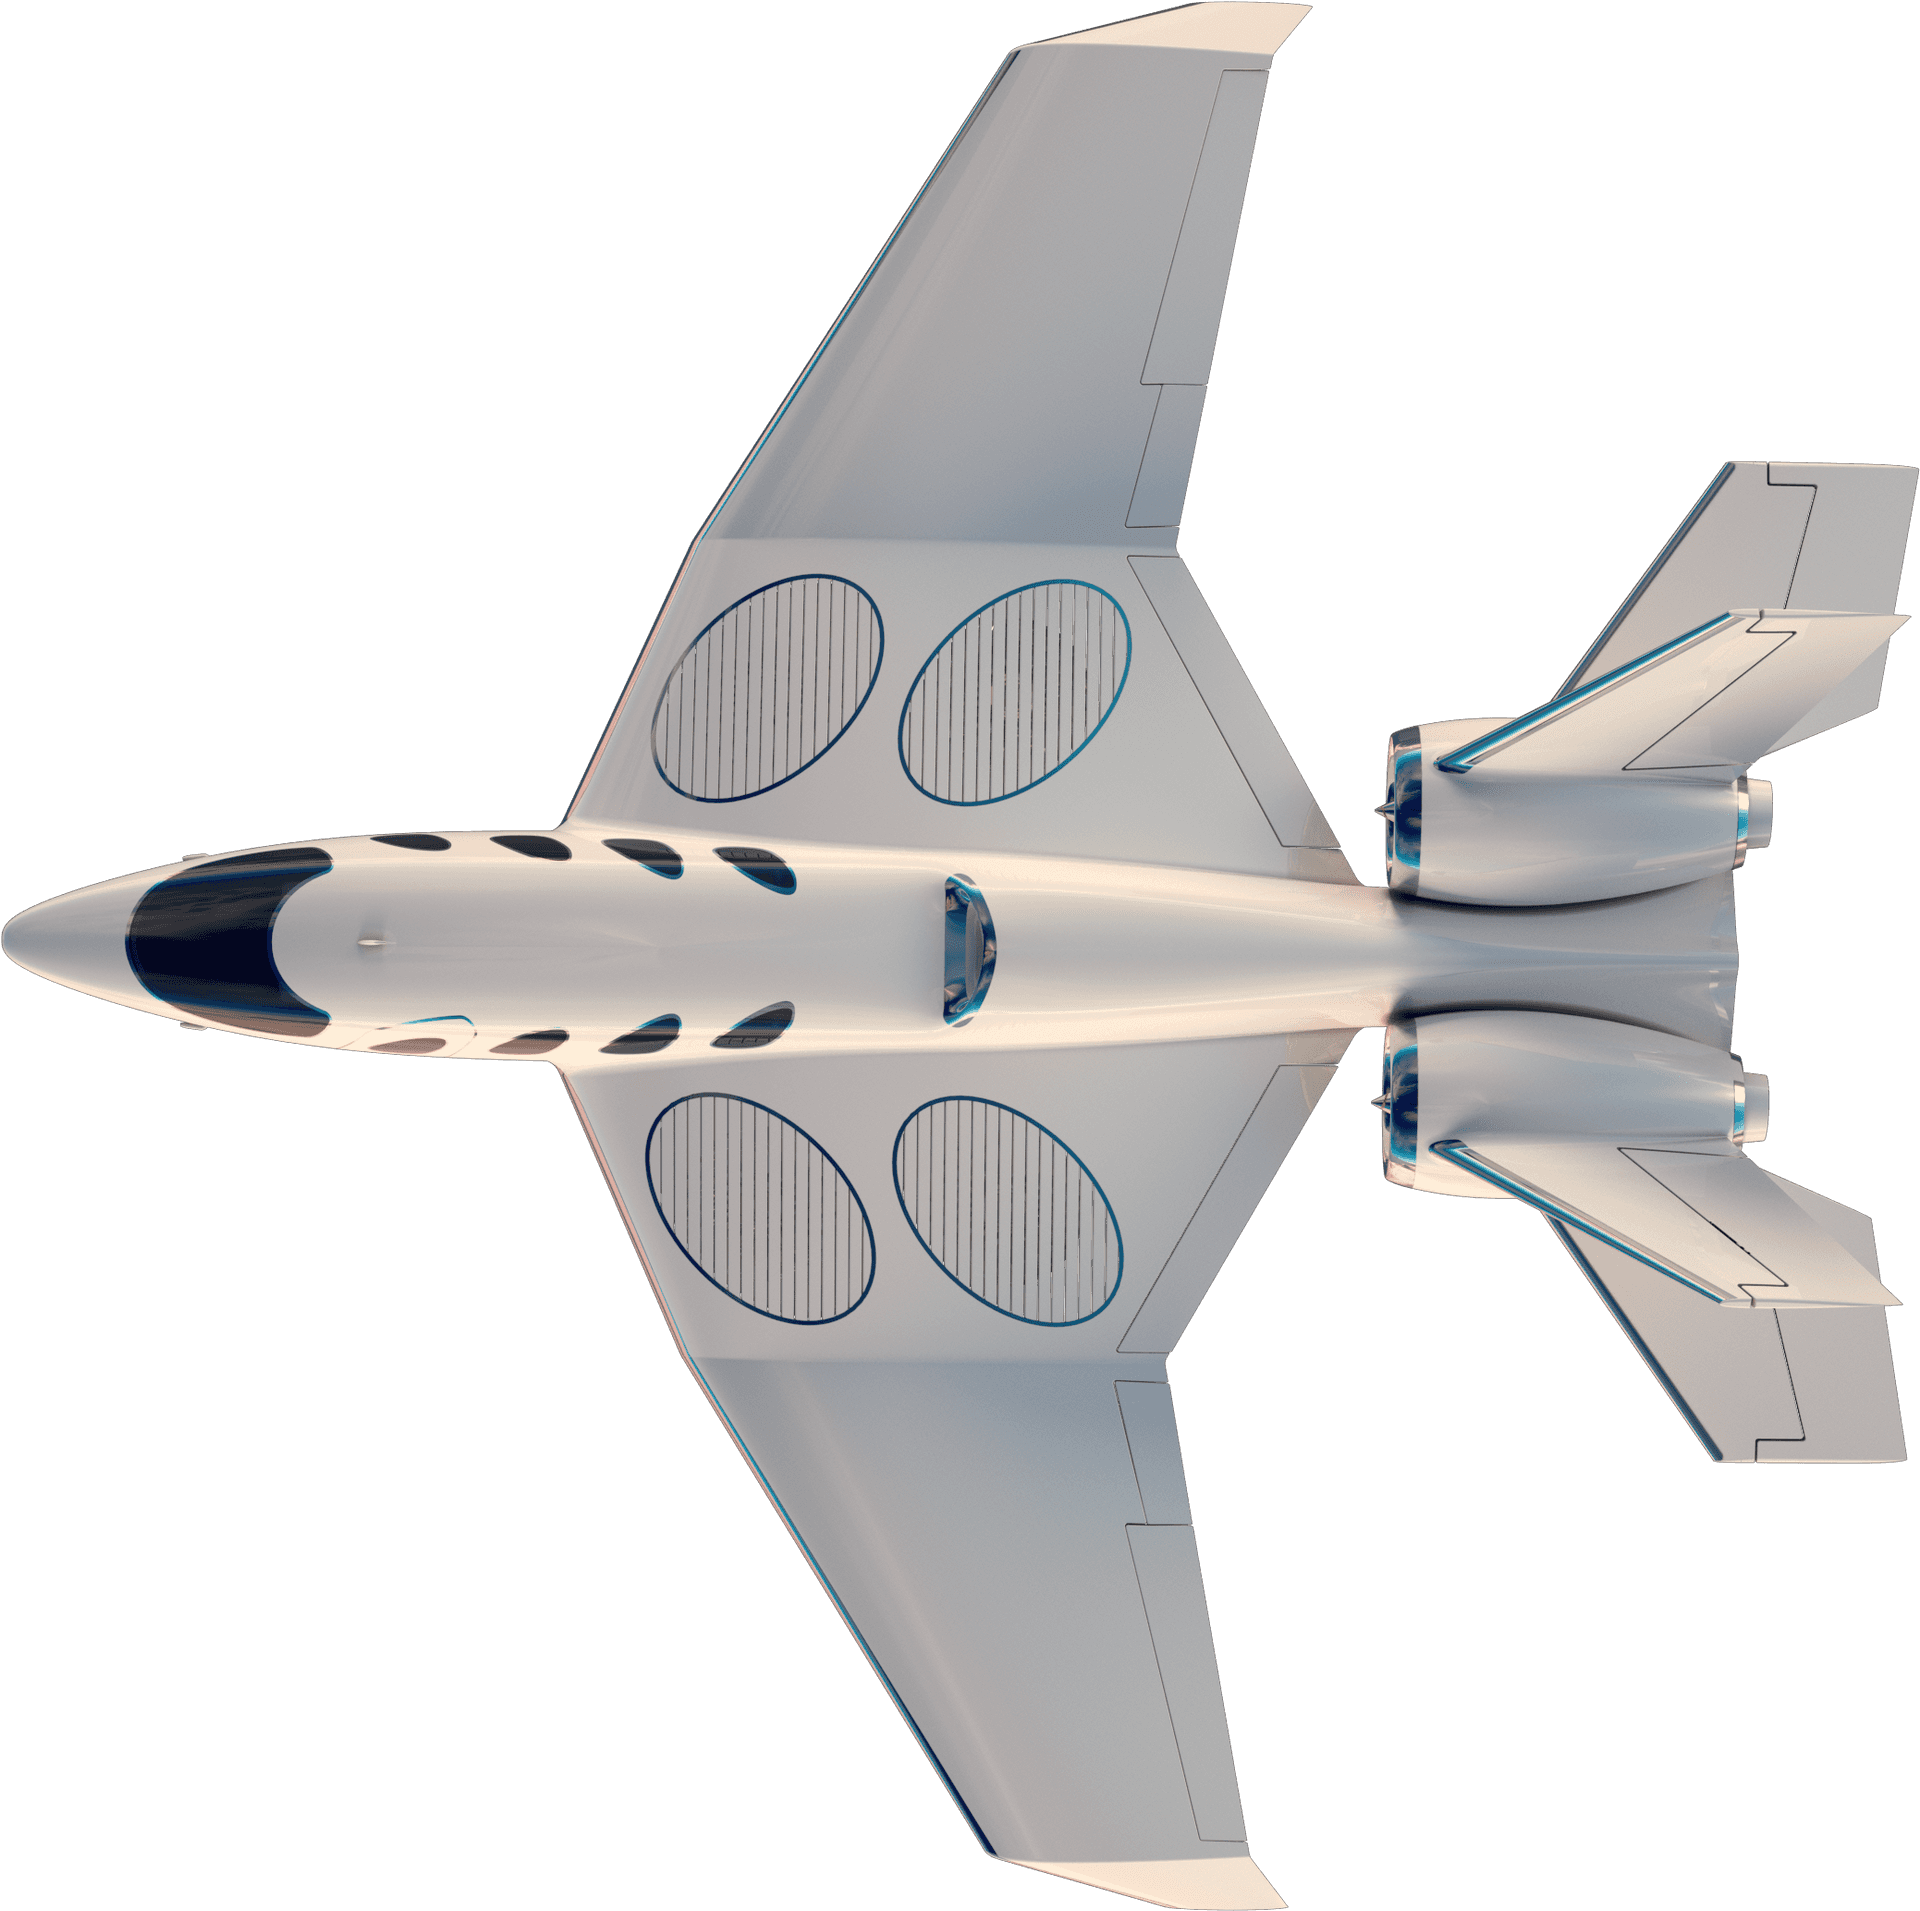 Futuristic Jet Fighter Concept PNG image